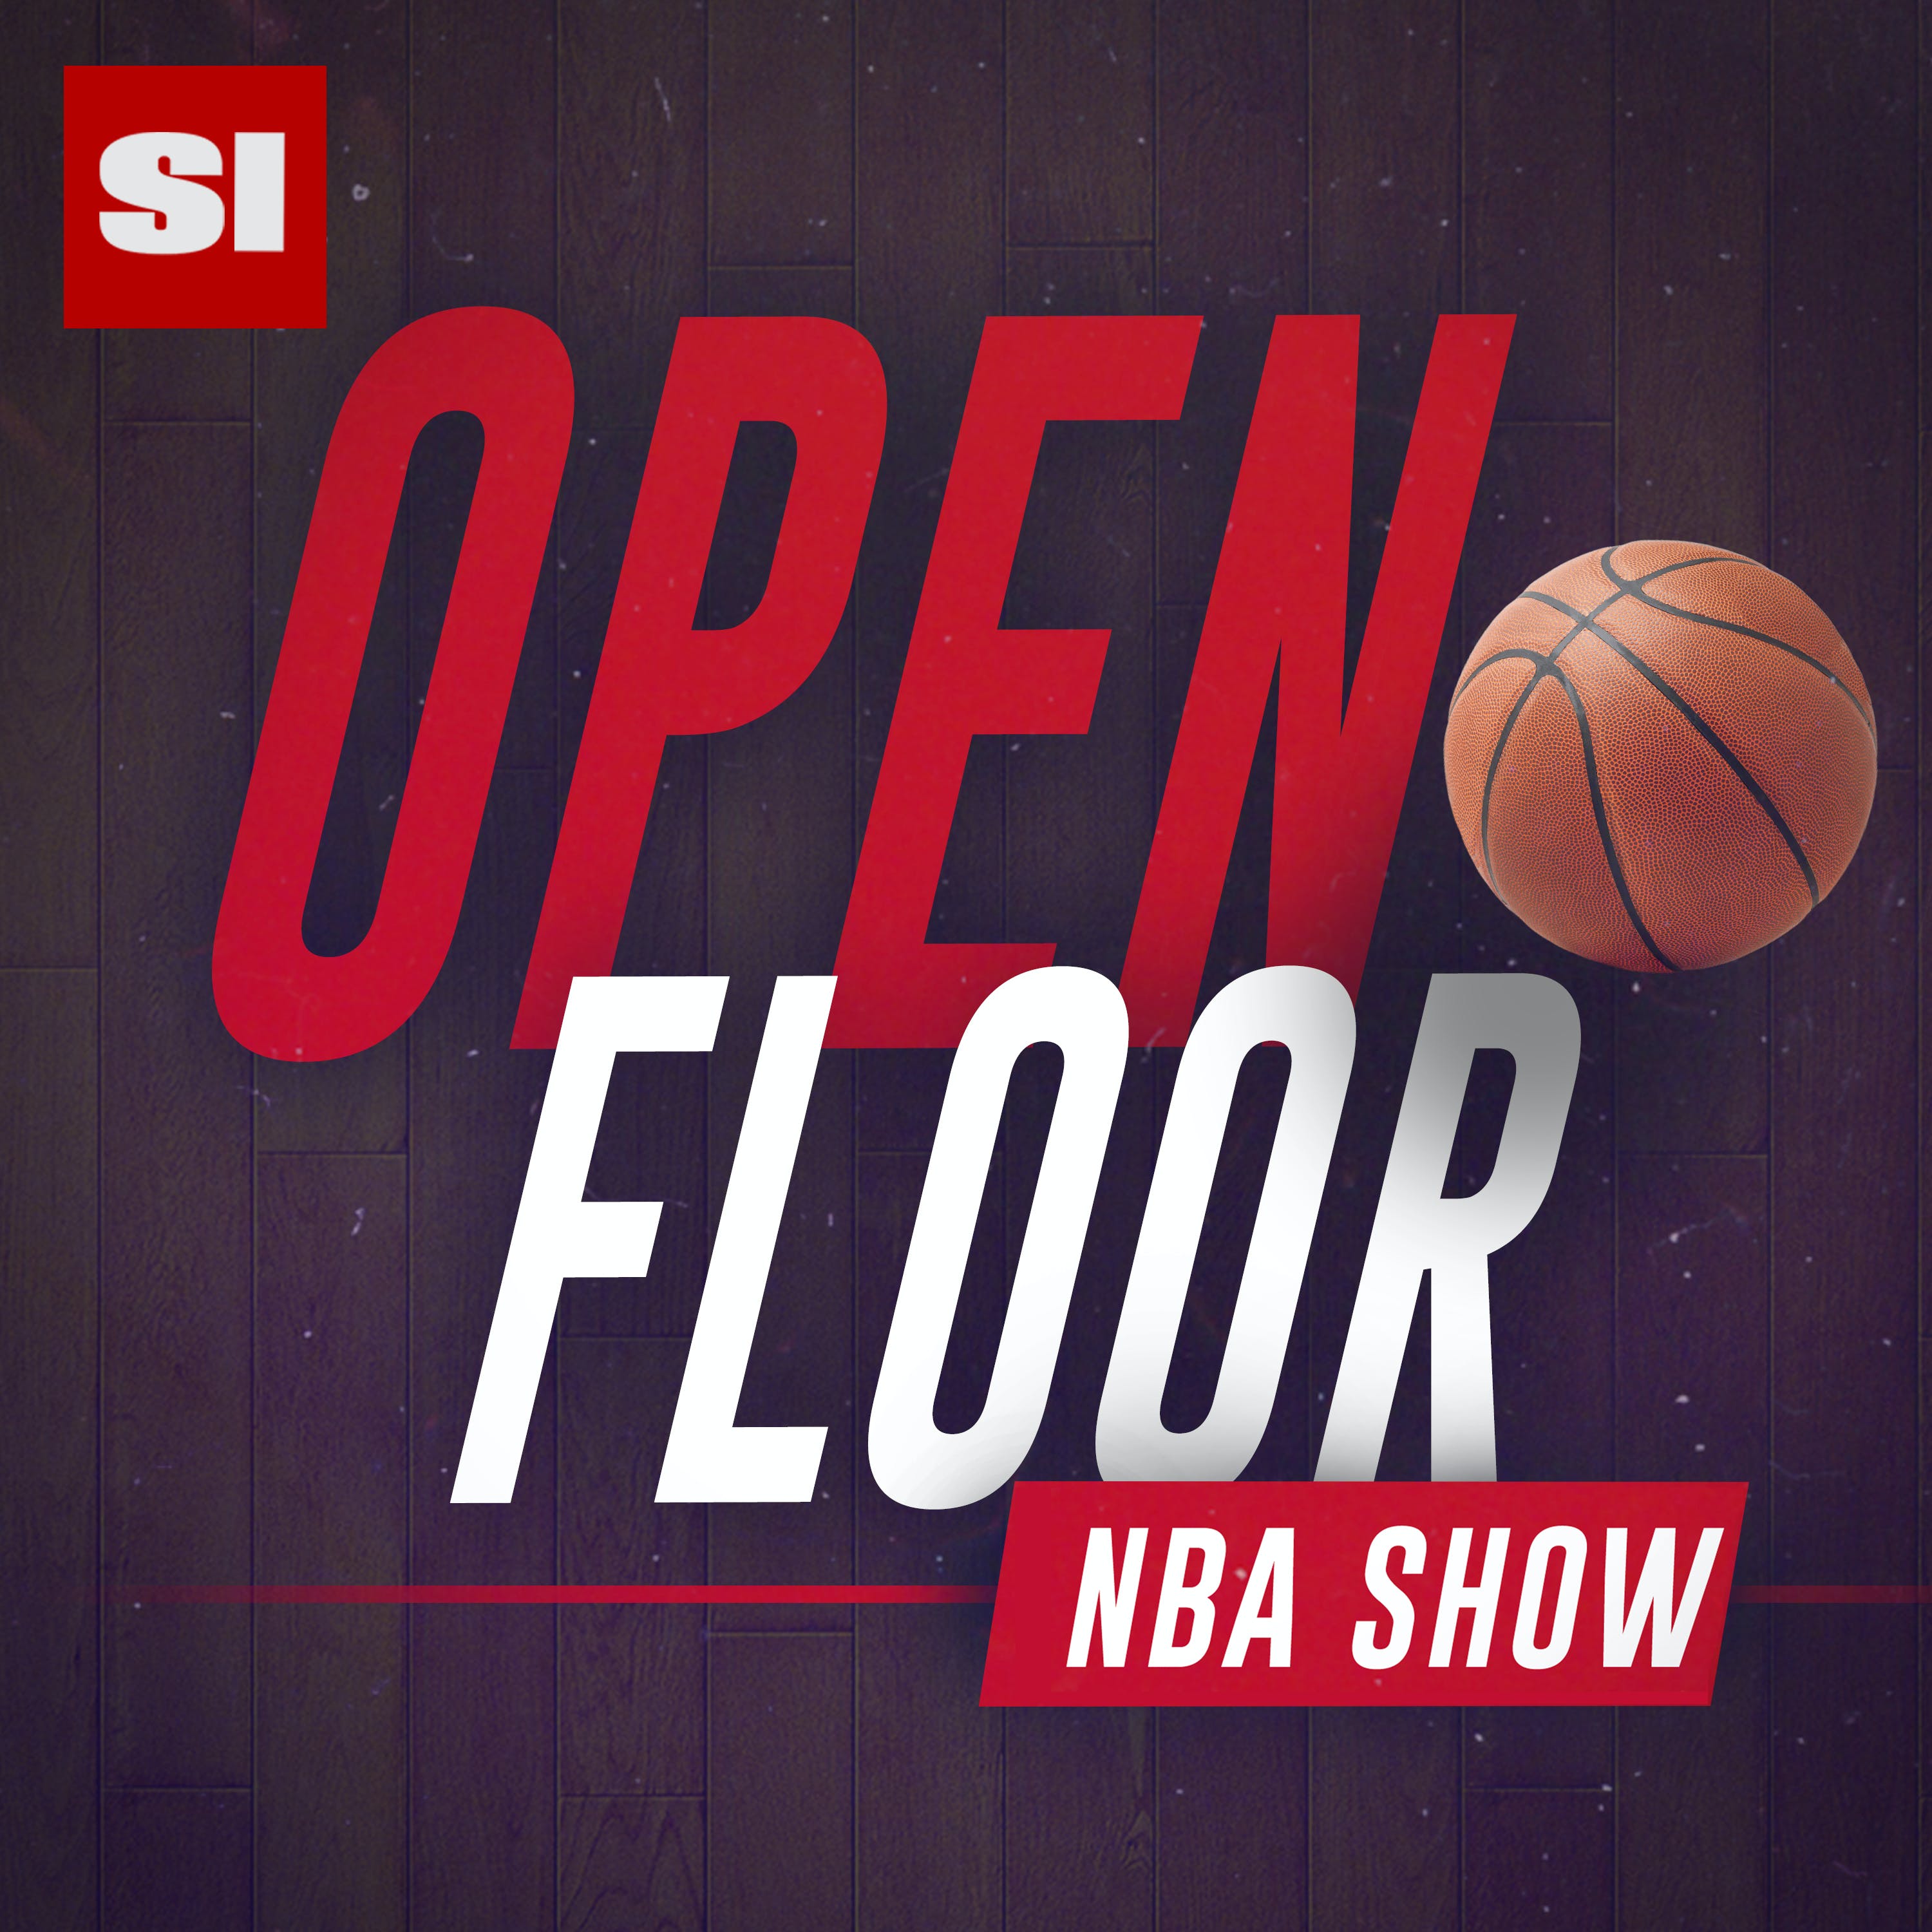 The coronavirus & the NBA schedule, airing old grievances